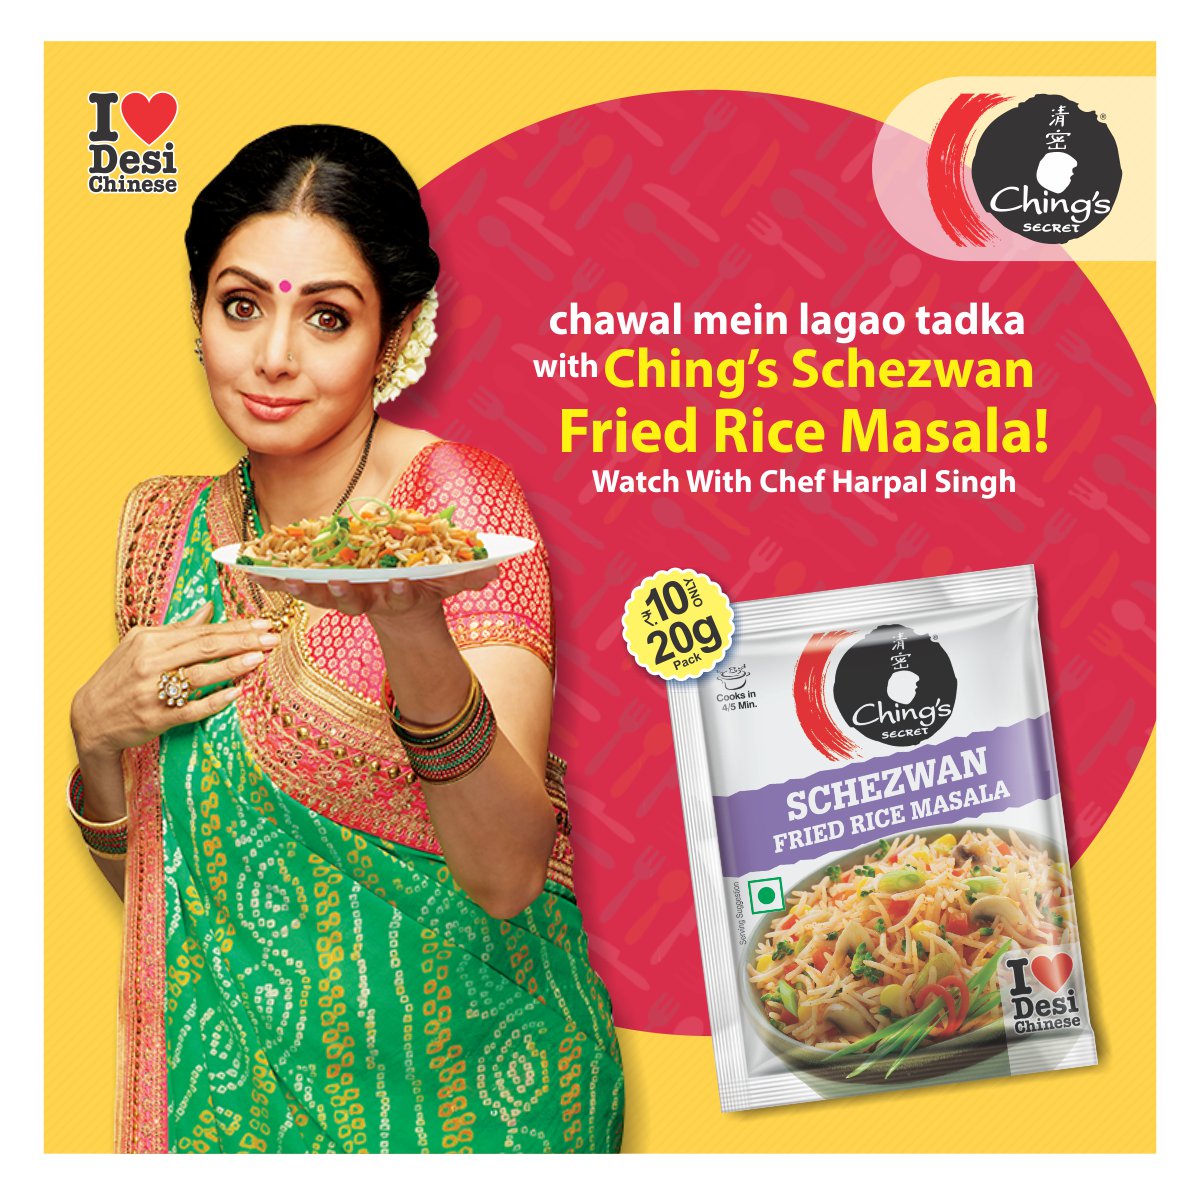 Ab bacche huye chawal mein lagega Desi Chinese ka tadka! 
To know how to cook Schezwan Fried Rice from the leftover rice, watch the step by step recipe video by Chef Harpal Singh Sokhi.
Recipe here: goo.gl/fhEdGk 
#DesiChinese #SchezwanFriedRice #Sridevi @harpalsokhi